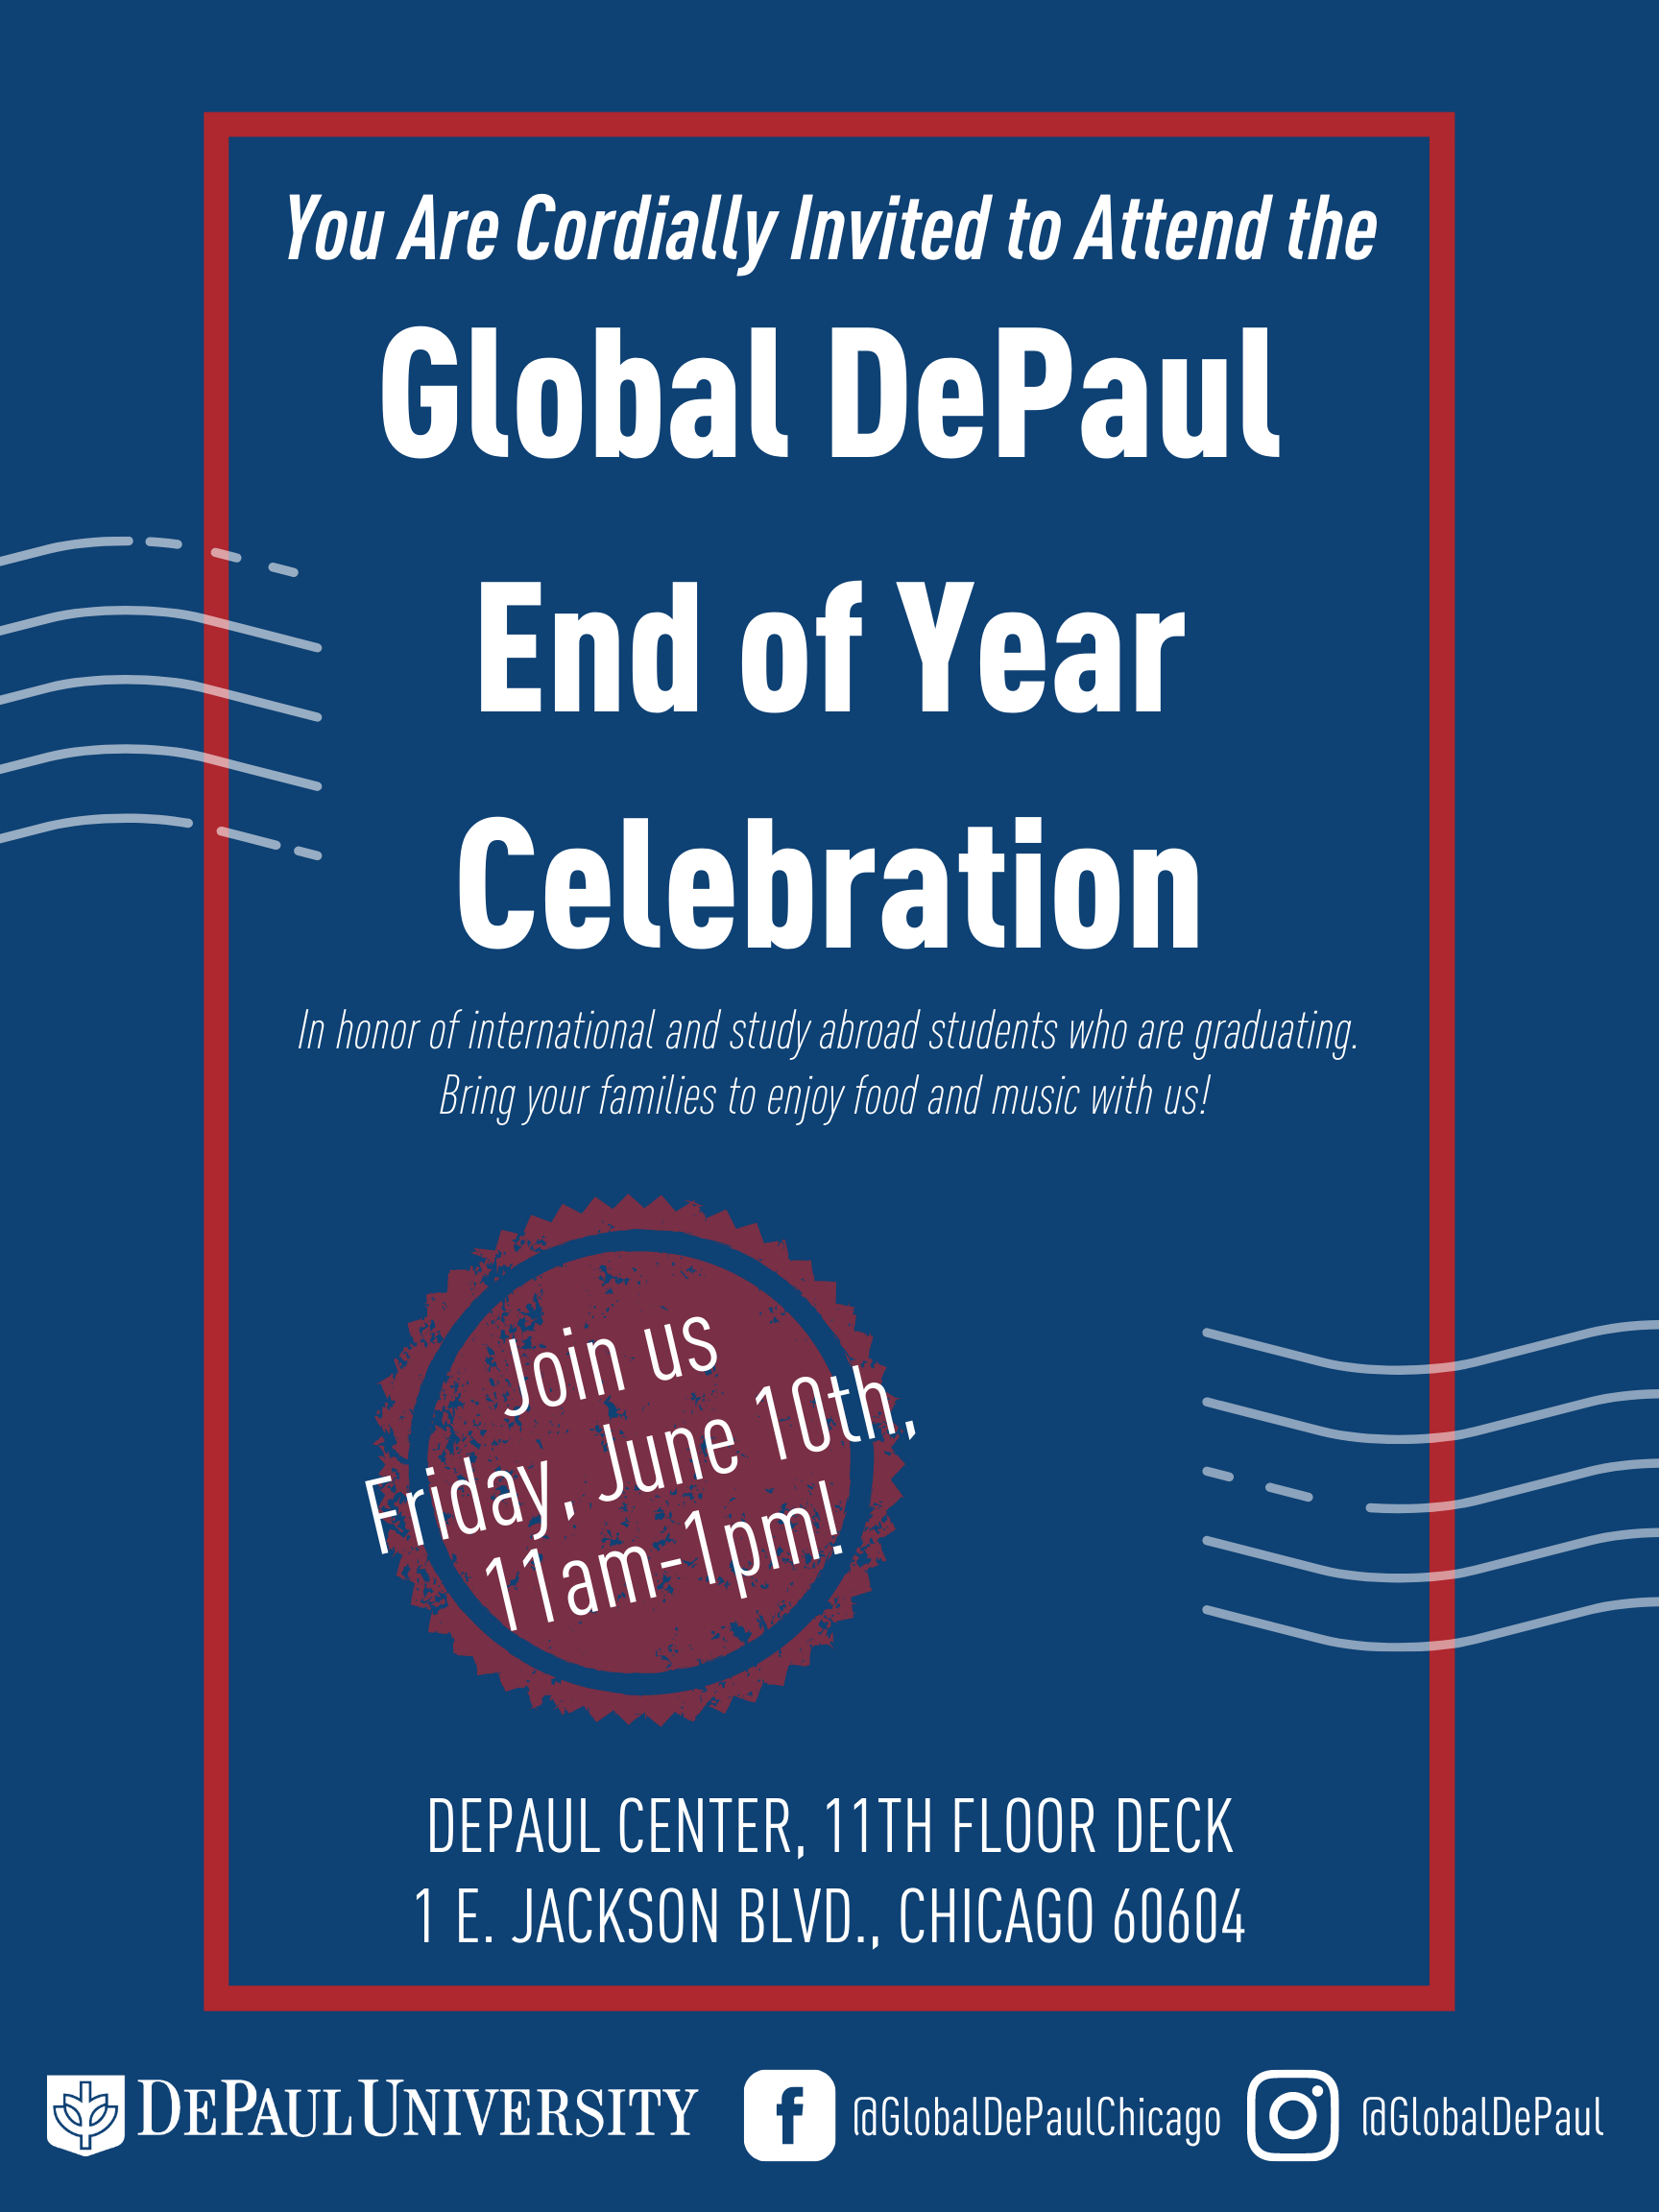 You are invited to attend the Global DePaul End of Year Celebration 